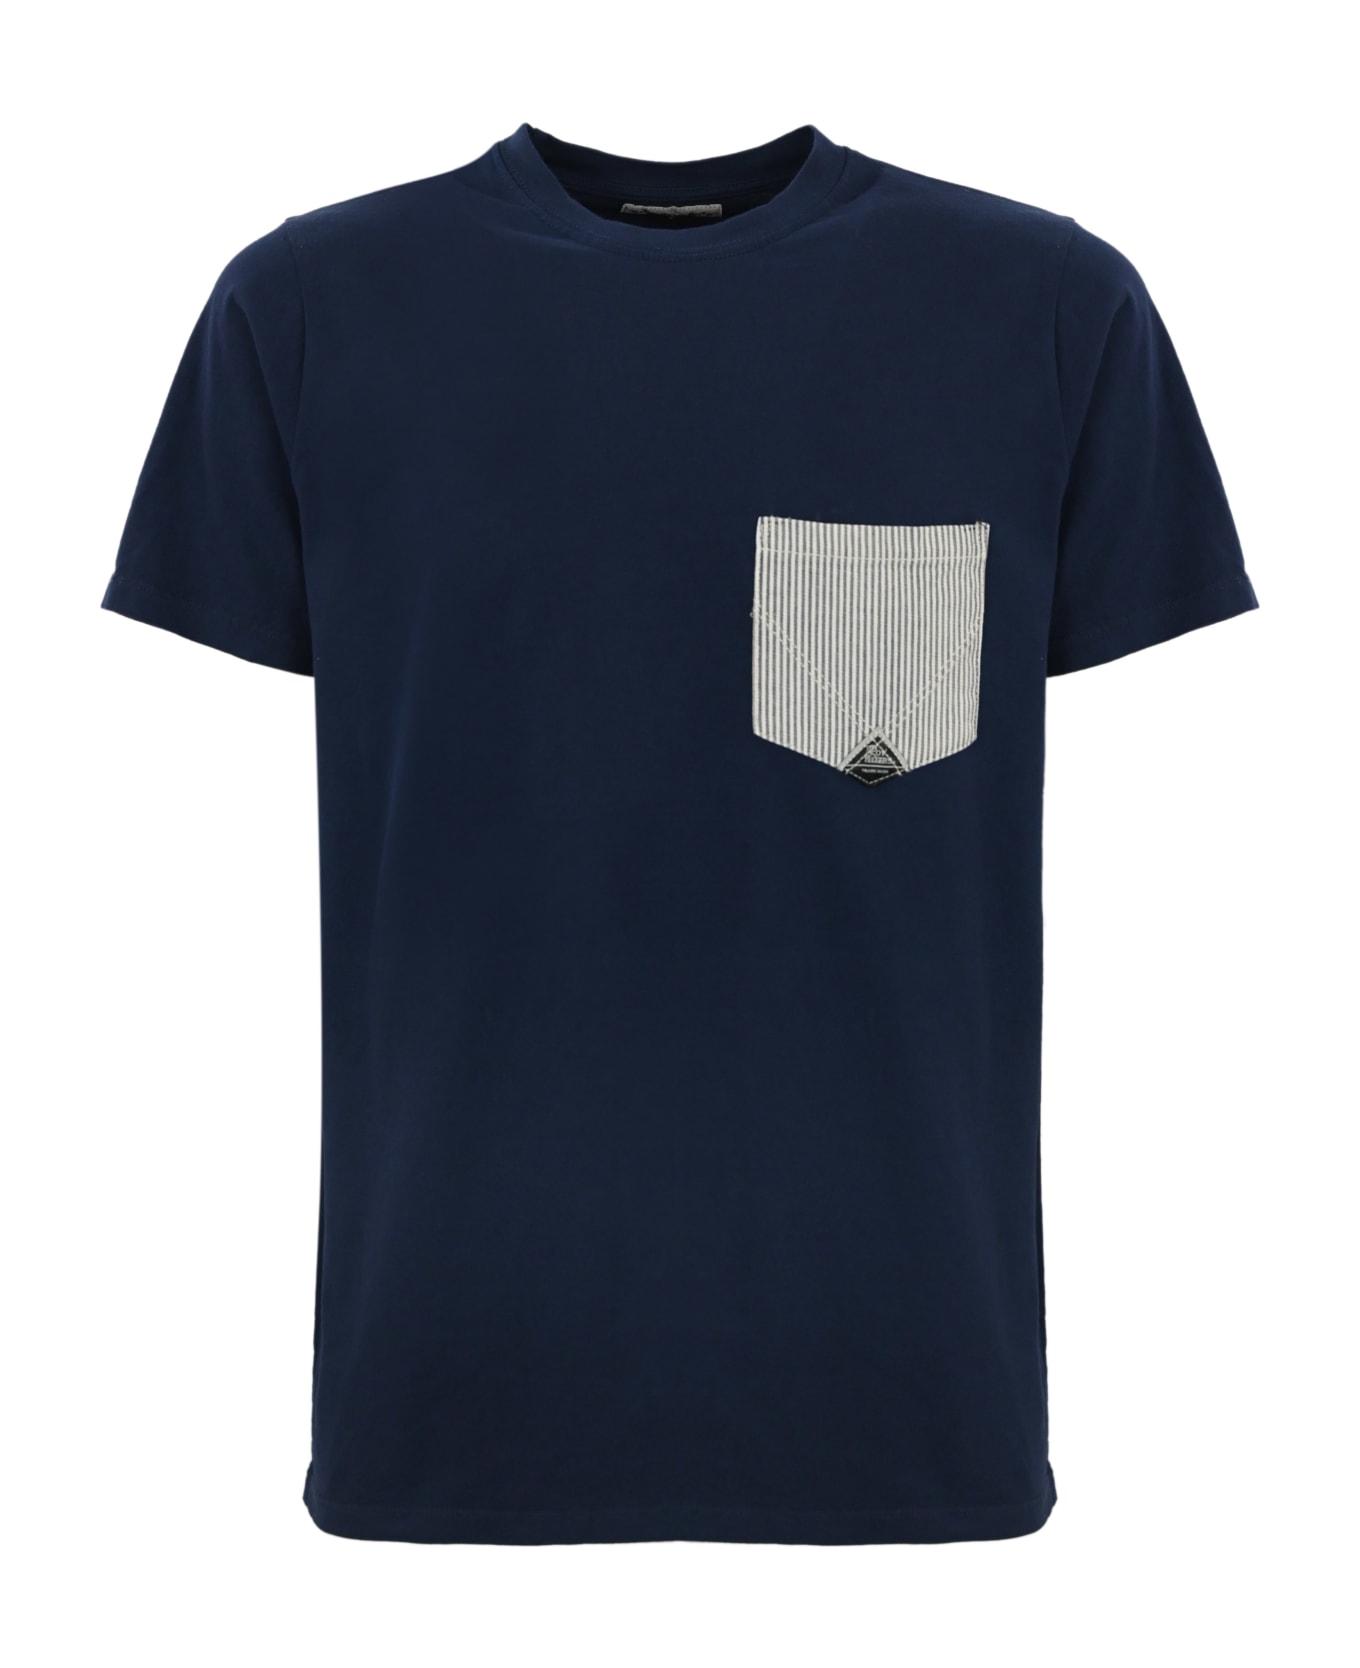 Roy Rogers Blue Cotton T-shirt With Pocket - Navy blue シャツ